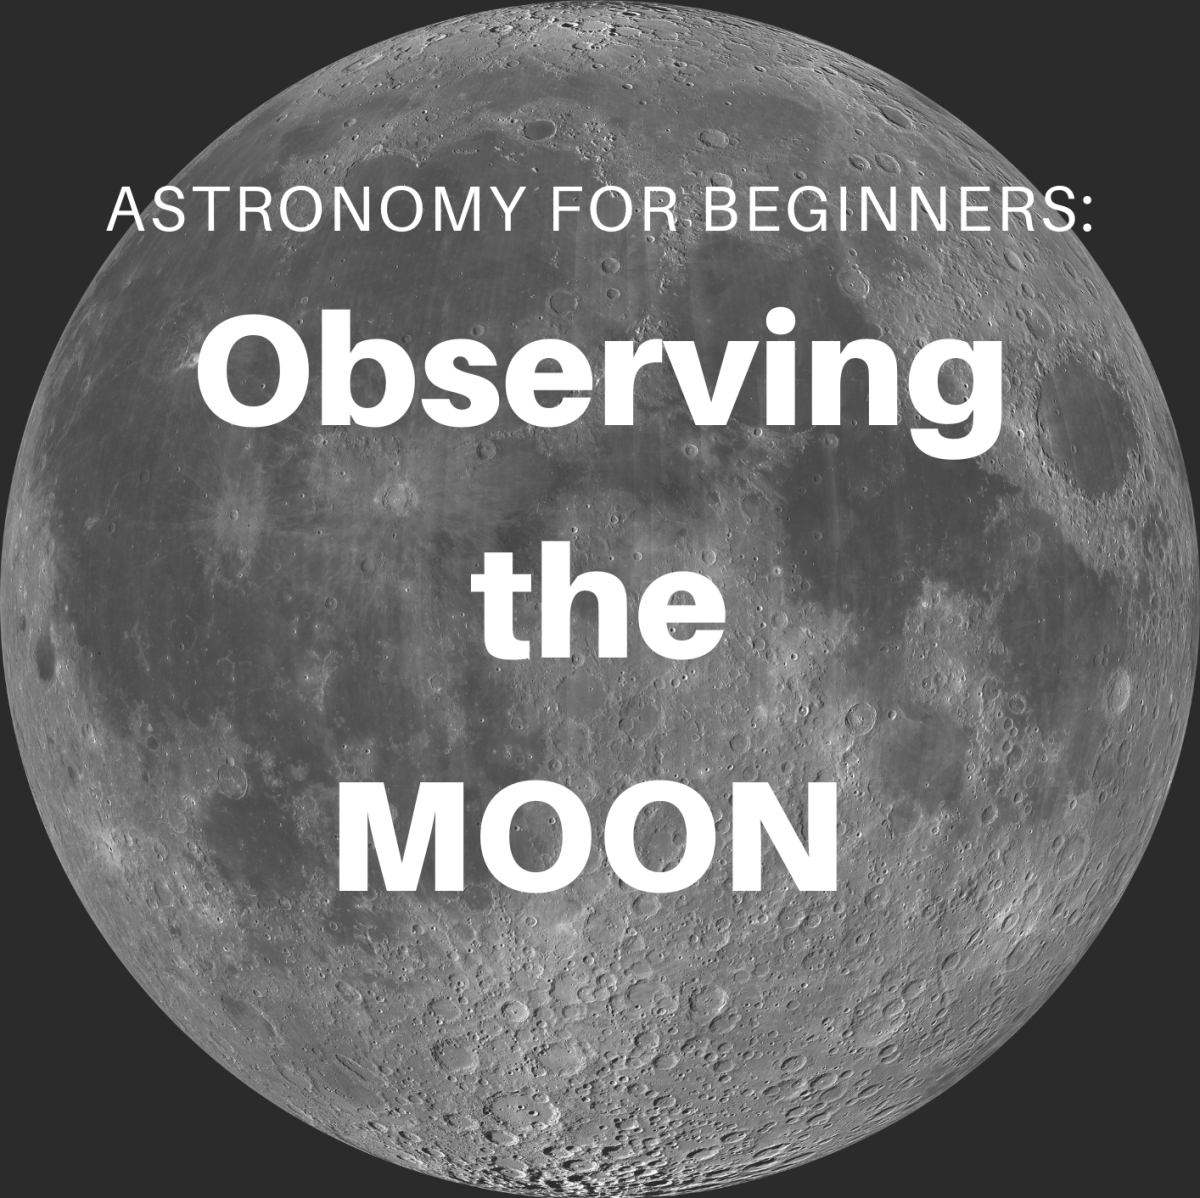 Astronomy for Beginners: Observing the Moon